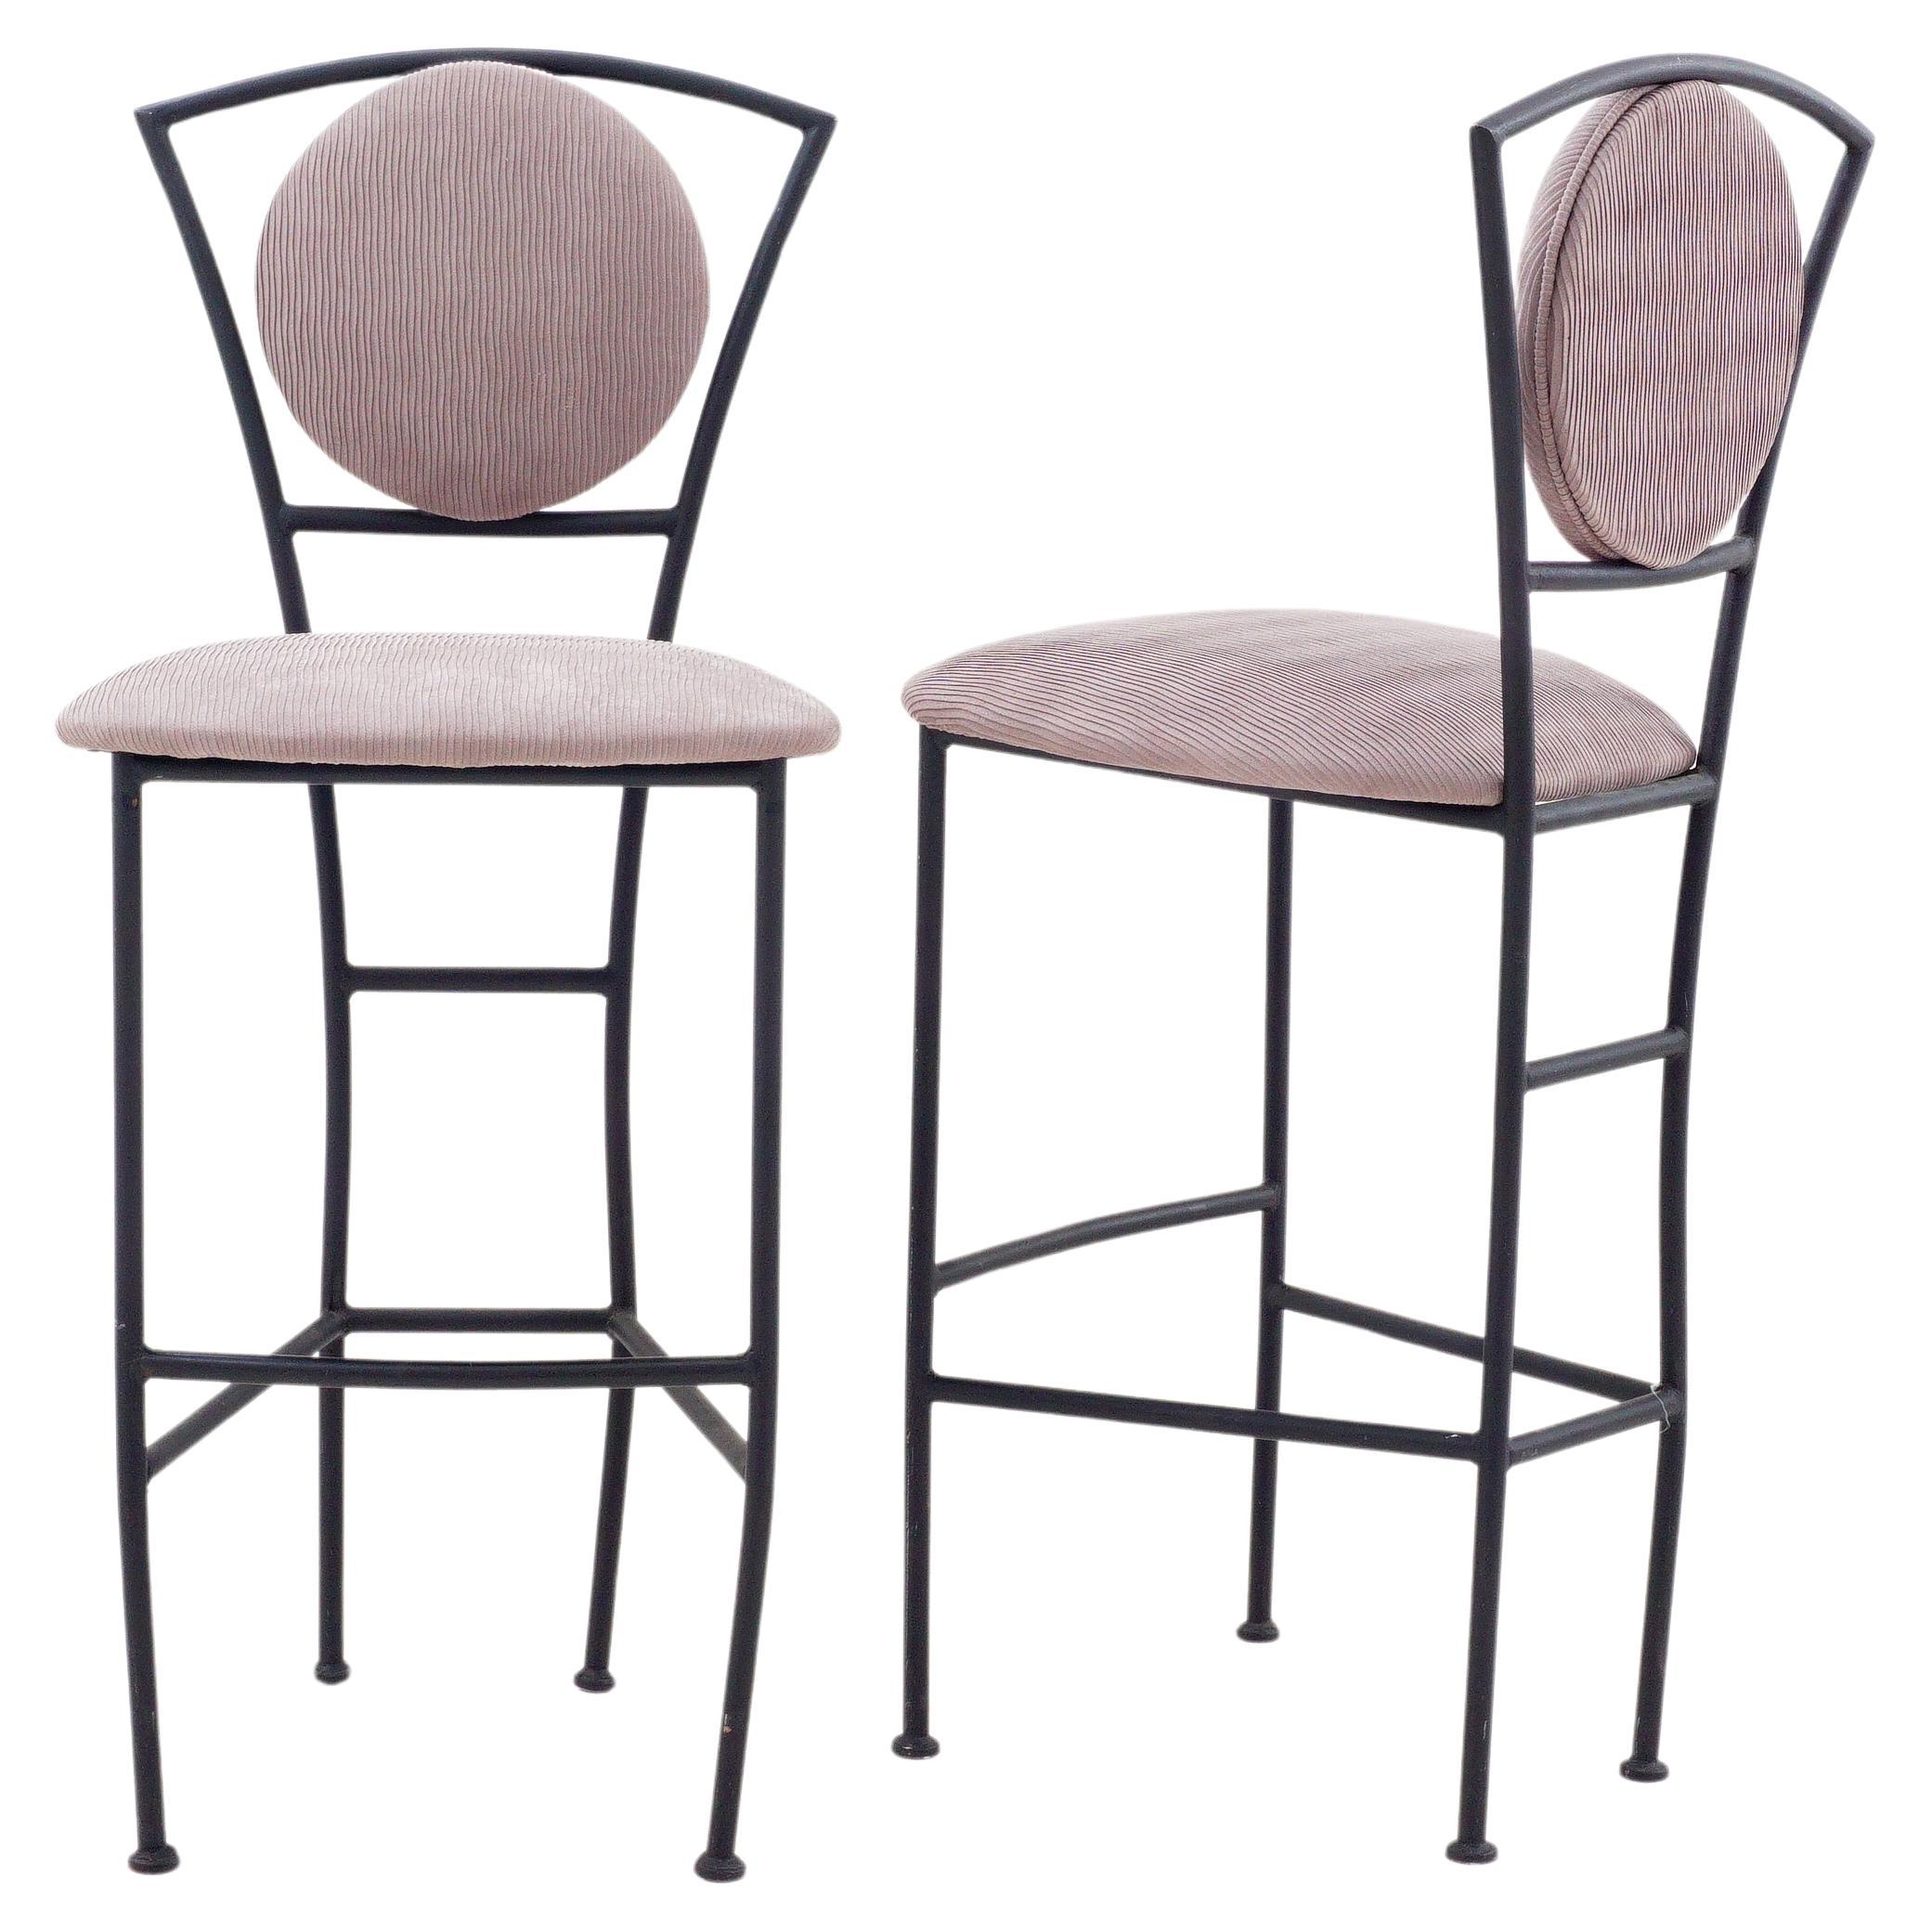 Pair of Postmodern Iron Barstools, 1990s In Good Condition For Sale In Philadelphia, PA